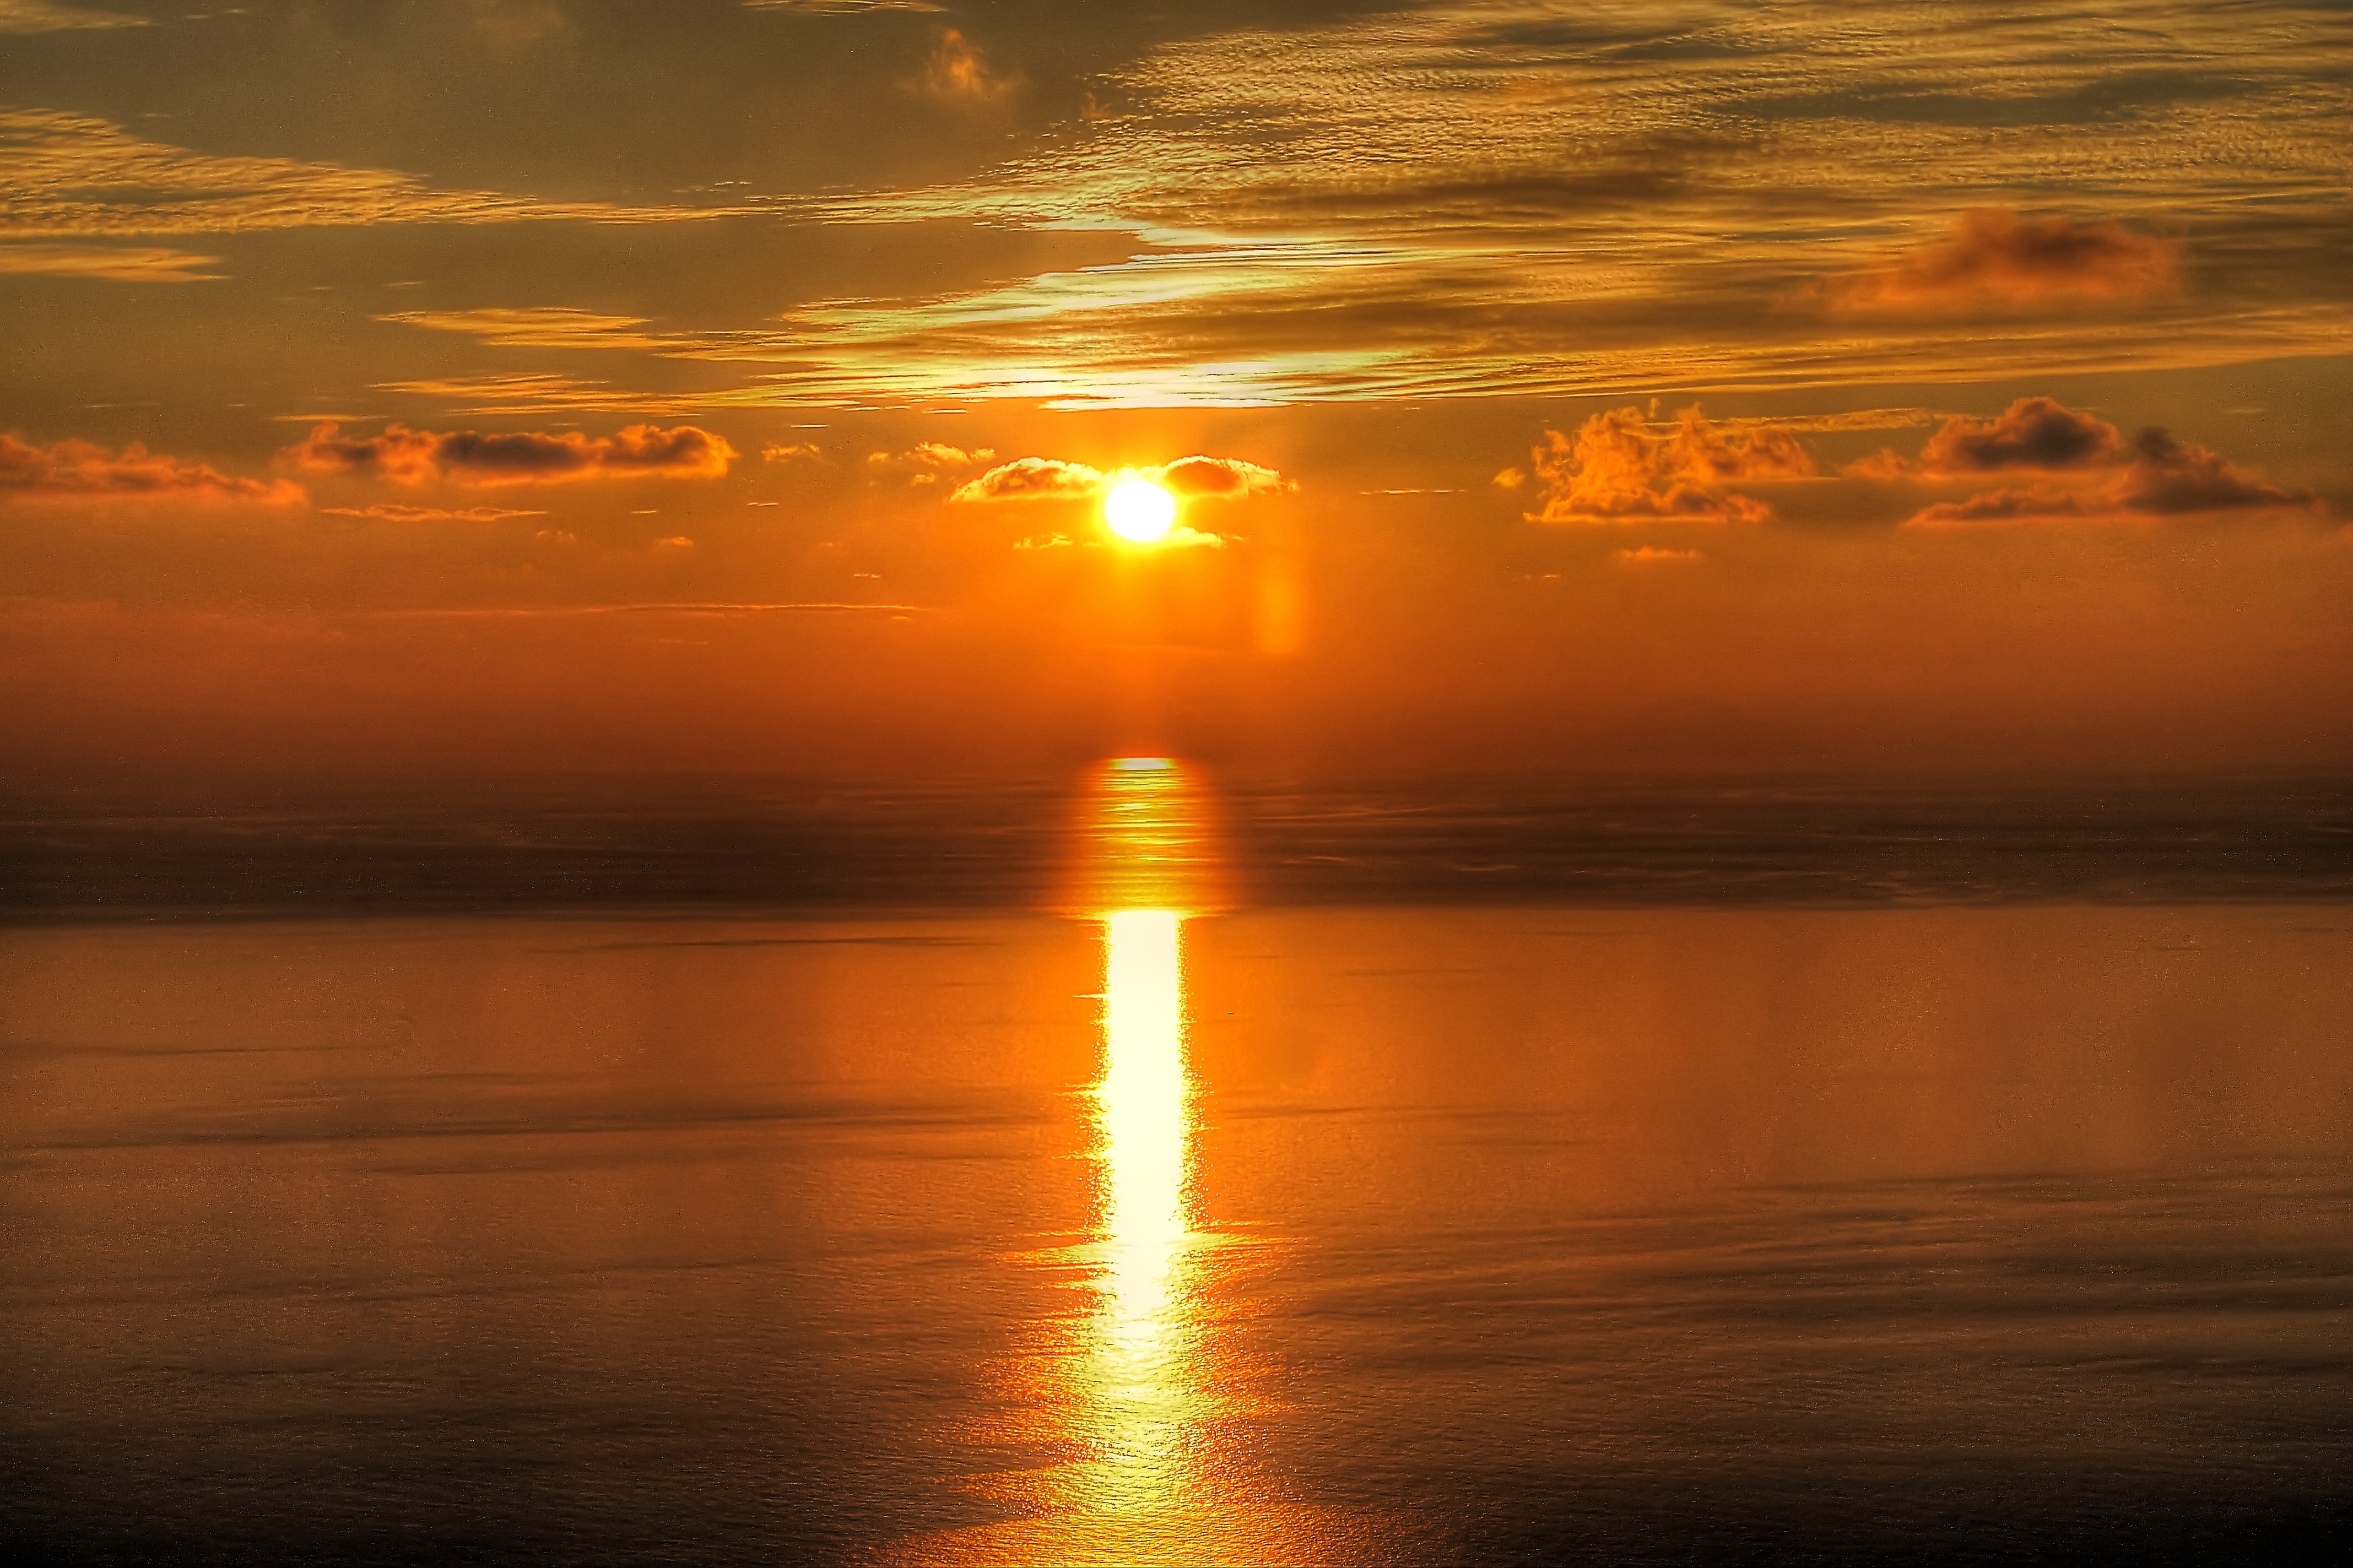 the_sun_in_the_evening___hdr_by_yoctox-d5s42x2 - A Stroke of Genius ...